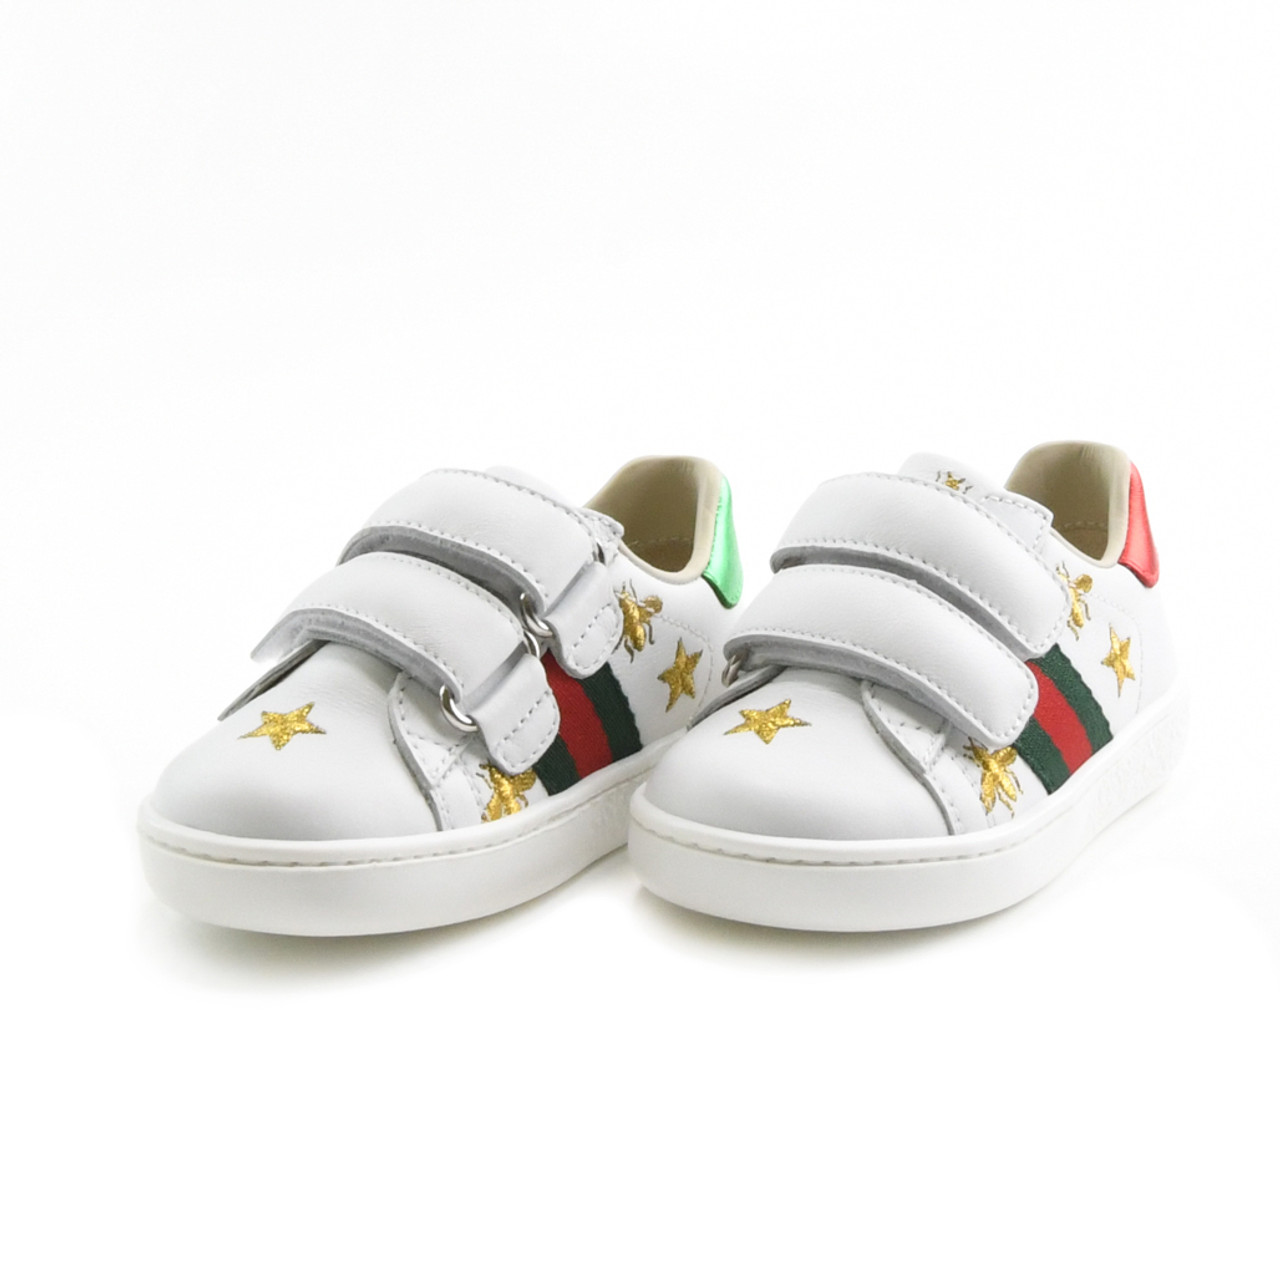 Karu handtekening drinken GUCCI Mini "Ace" Sneakers with Bees and Stars for Girls - Girls' Collection  | Hera + Hermes